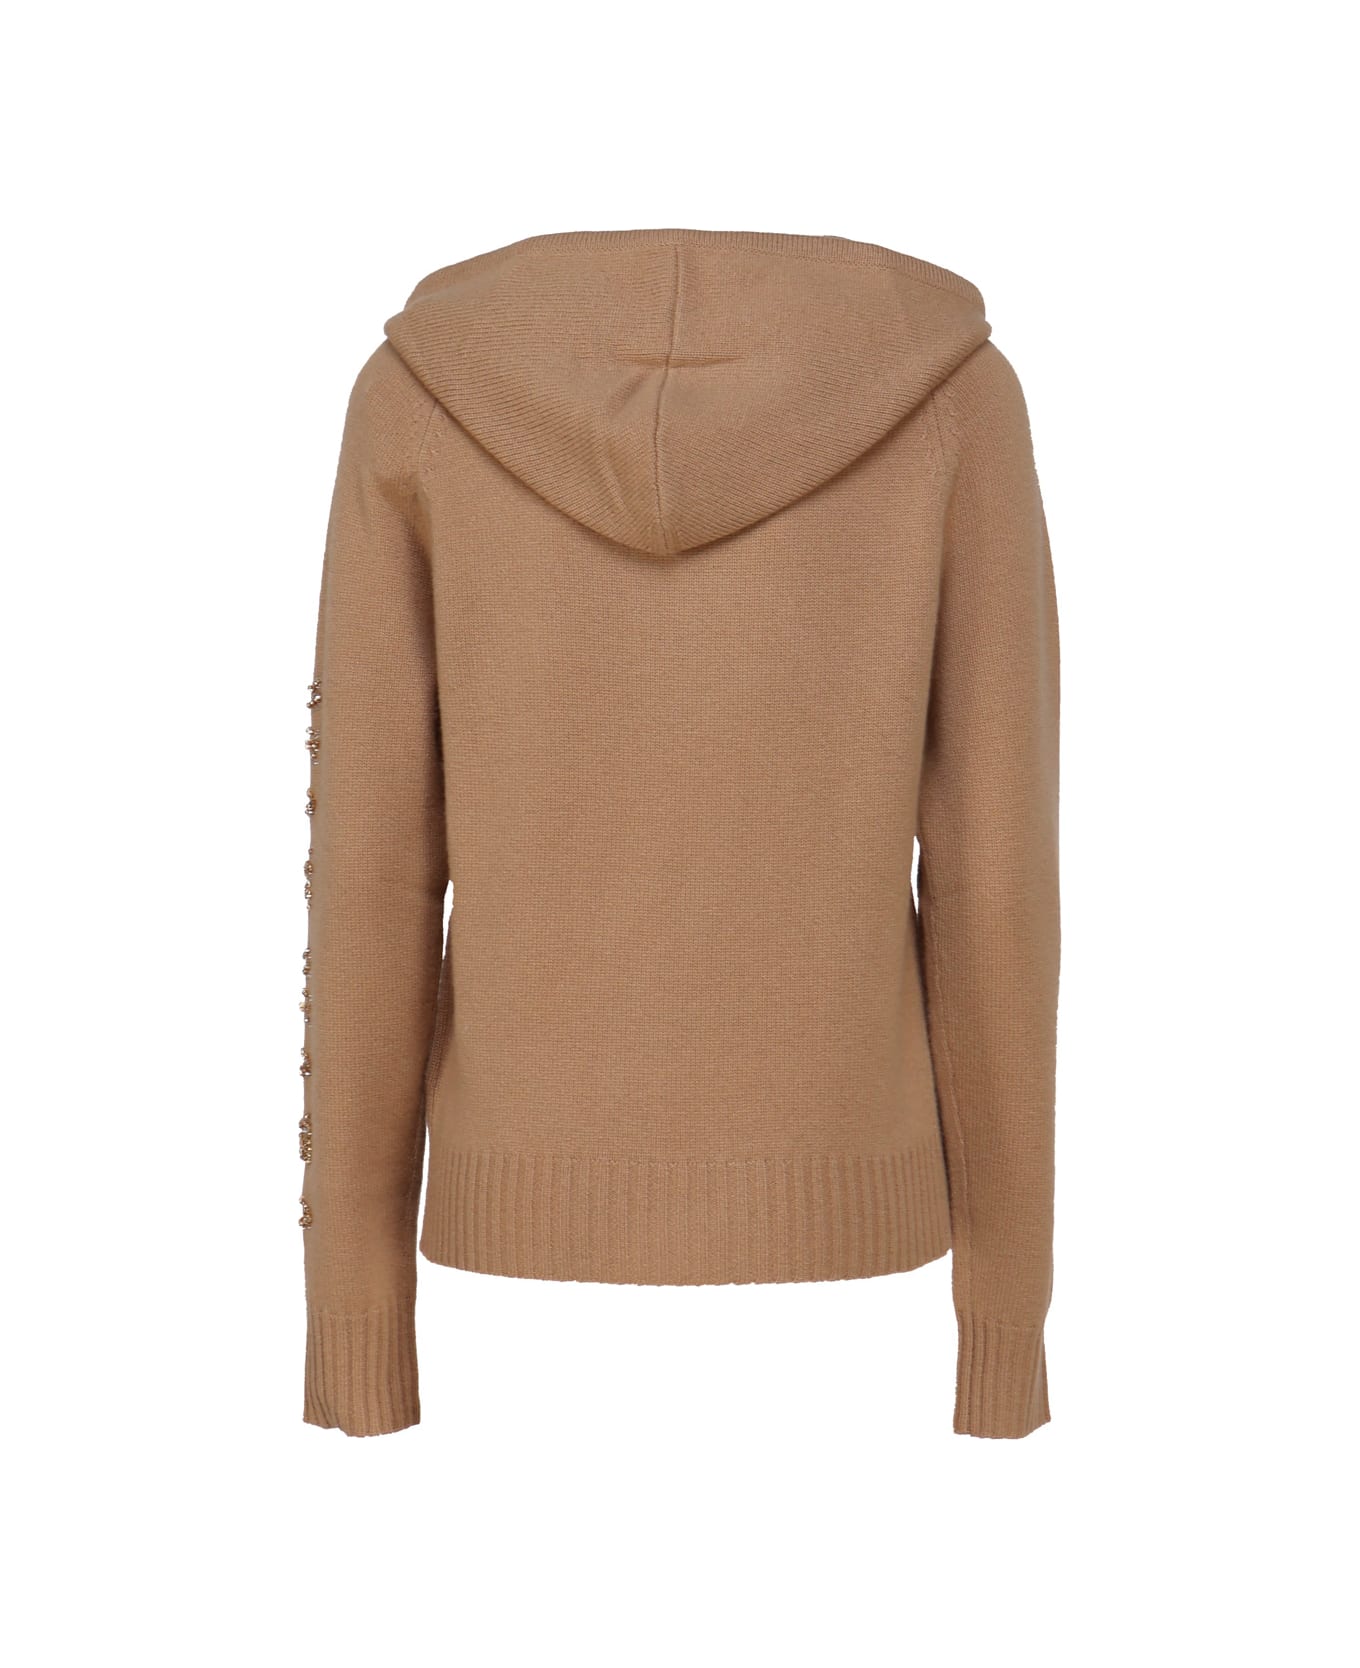 Max Mara Pineapple Sweater In Wool And Cashmere - Brown